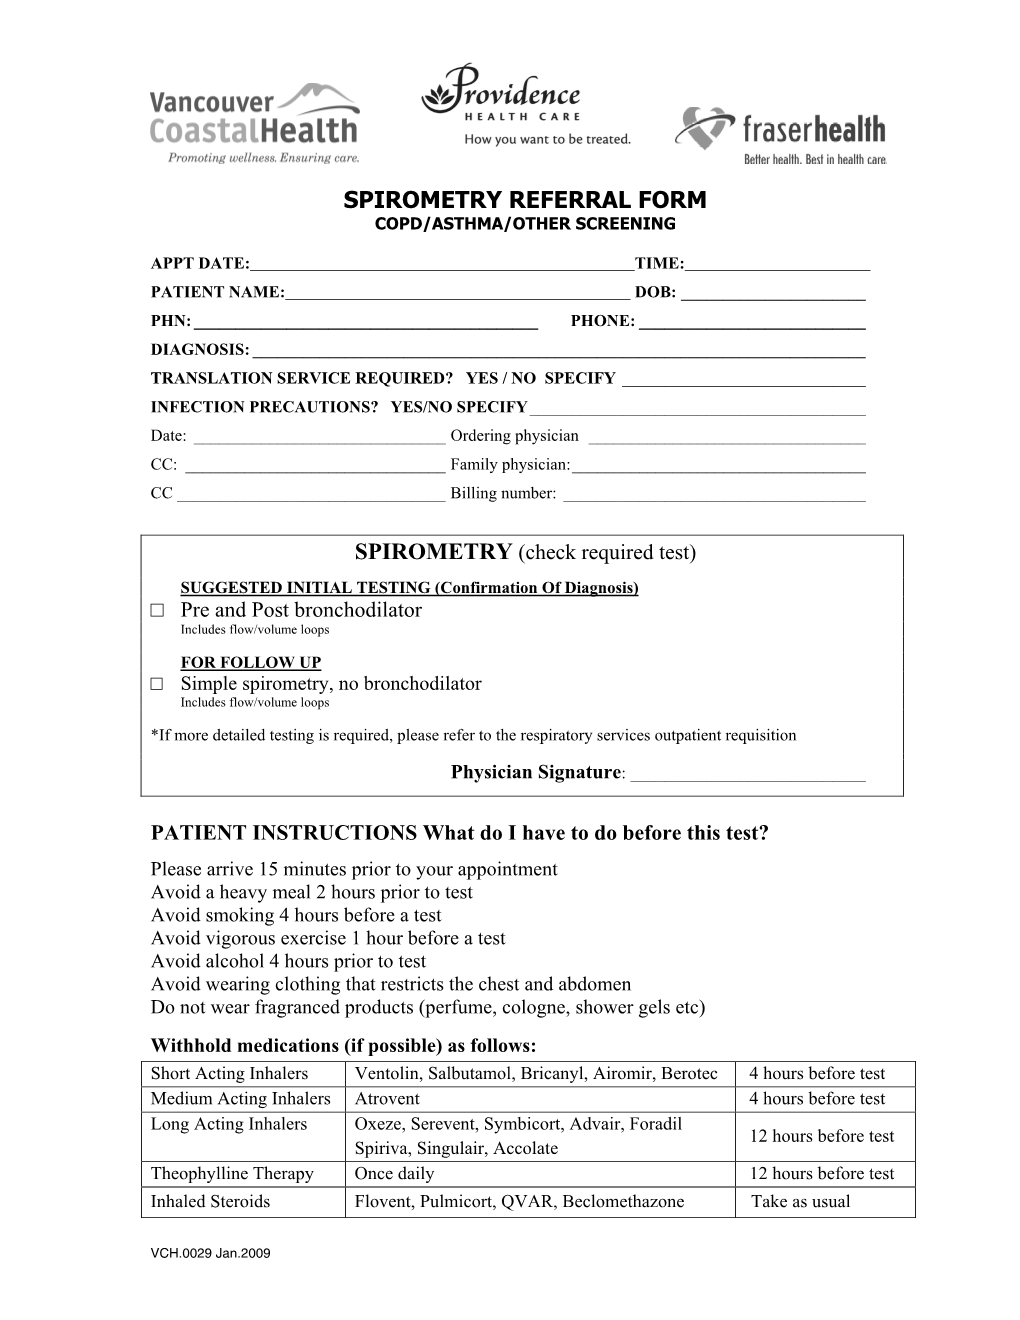 Universal Spirometry Clinic Referral Form